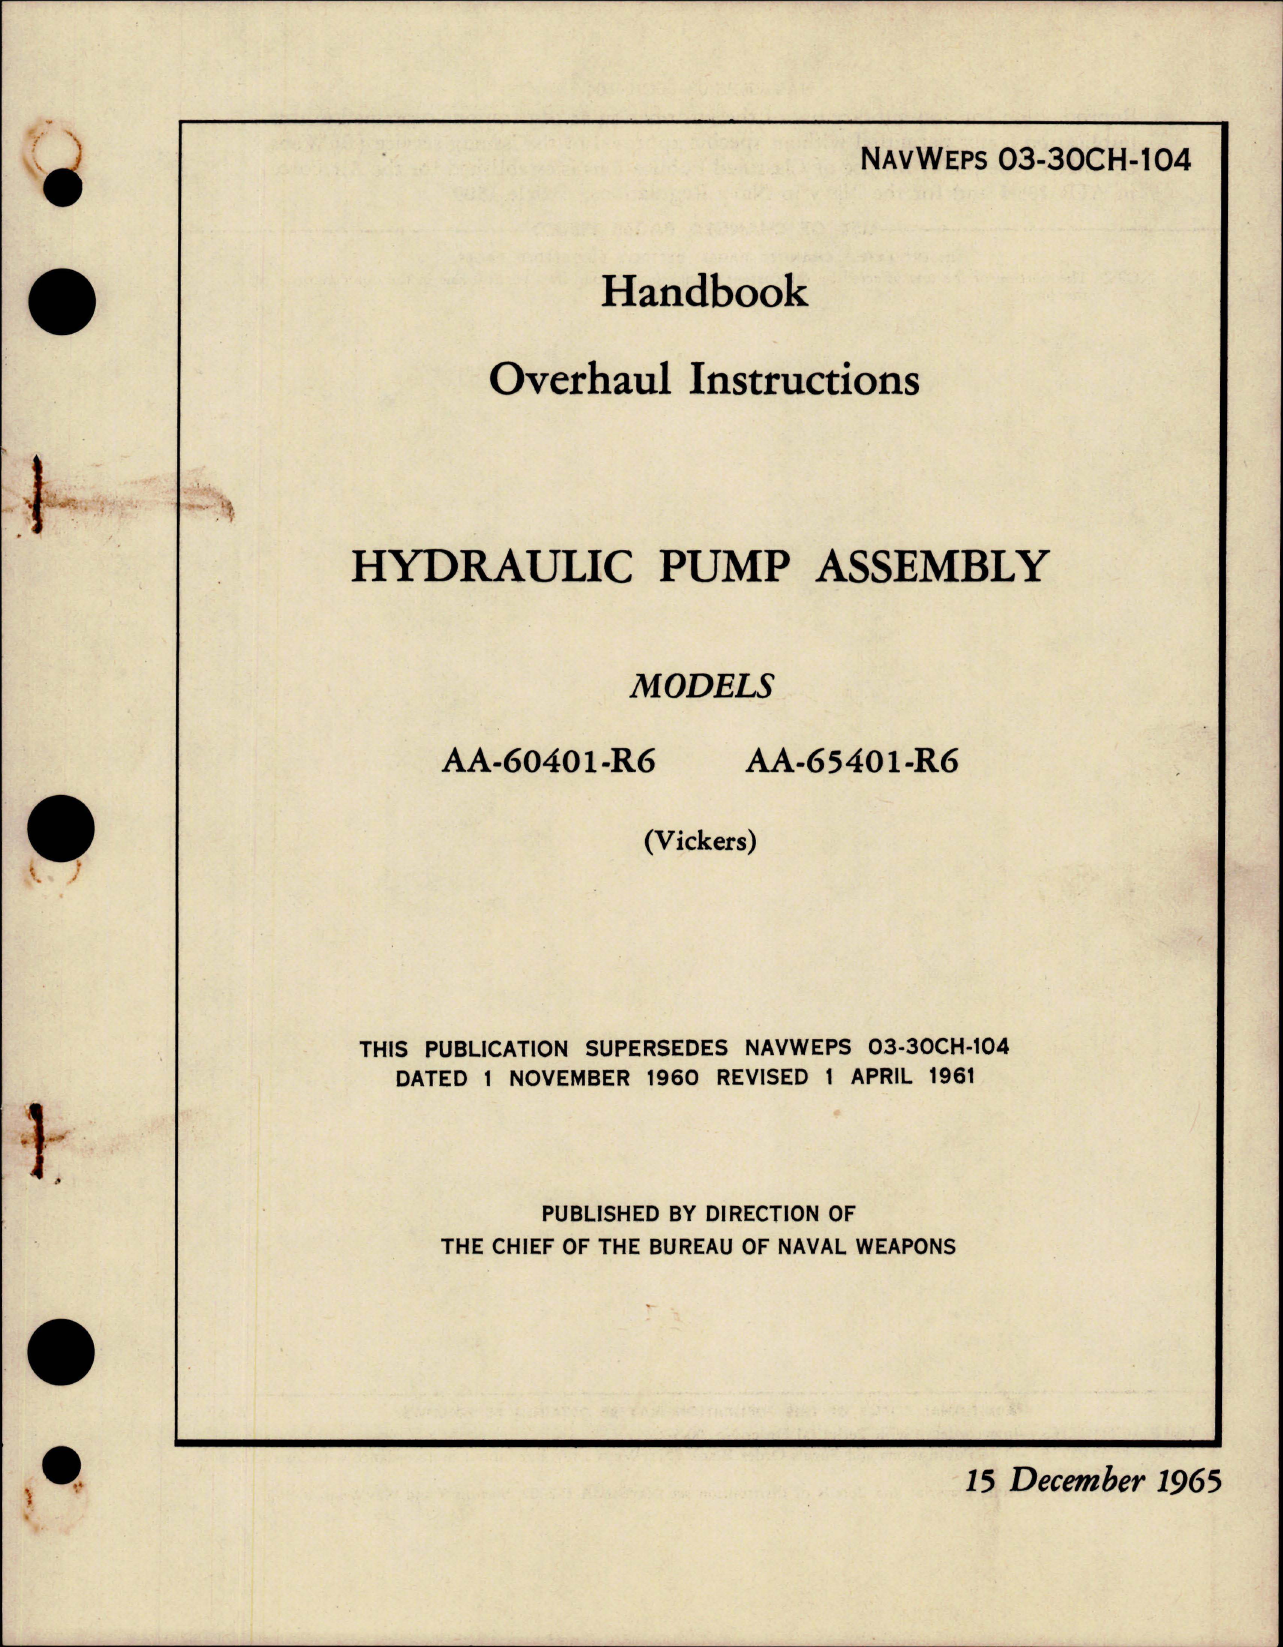 Sample page 1 from AirCorps Library document: Overhaul Instructions for Hydraulic Pump Assembly - Models AA-60401-R6 and AA-65401-R6 